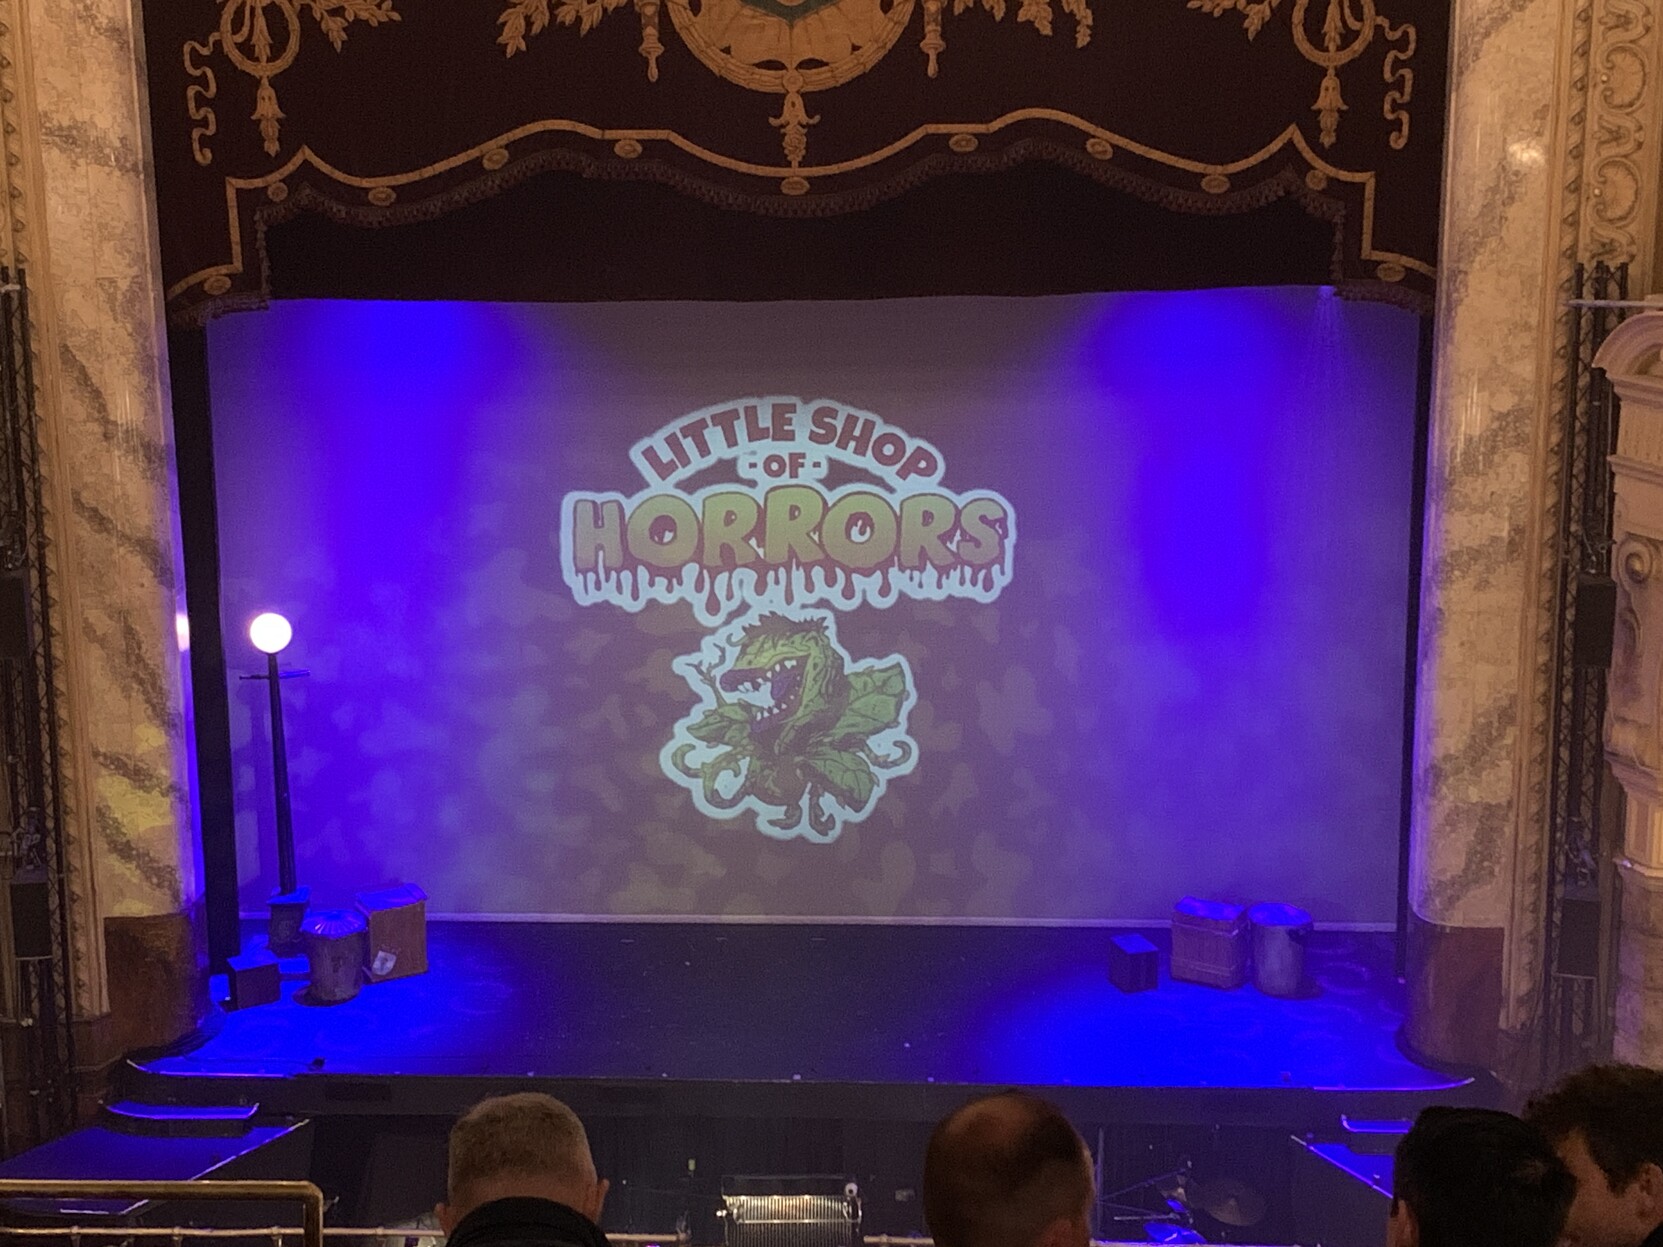 Looking down at a stage with blue lighting with the little shop of horrors logo. The stage is surrounded by while marble pillars